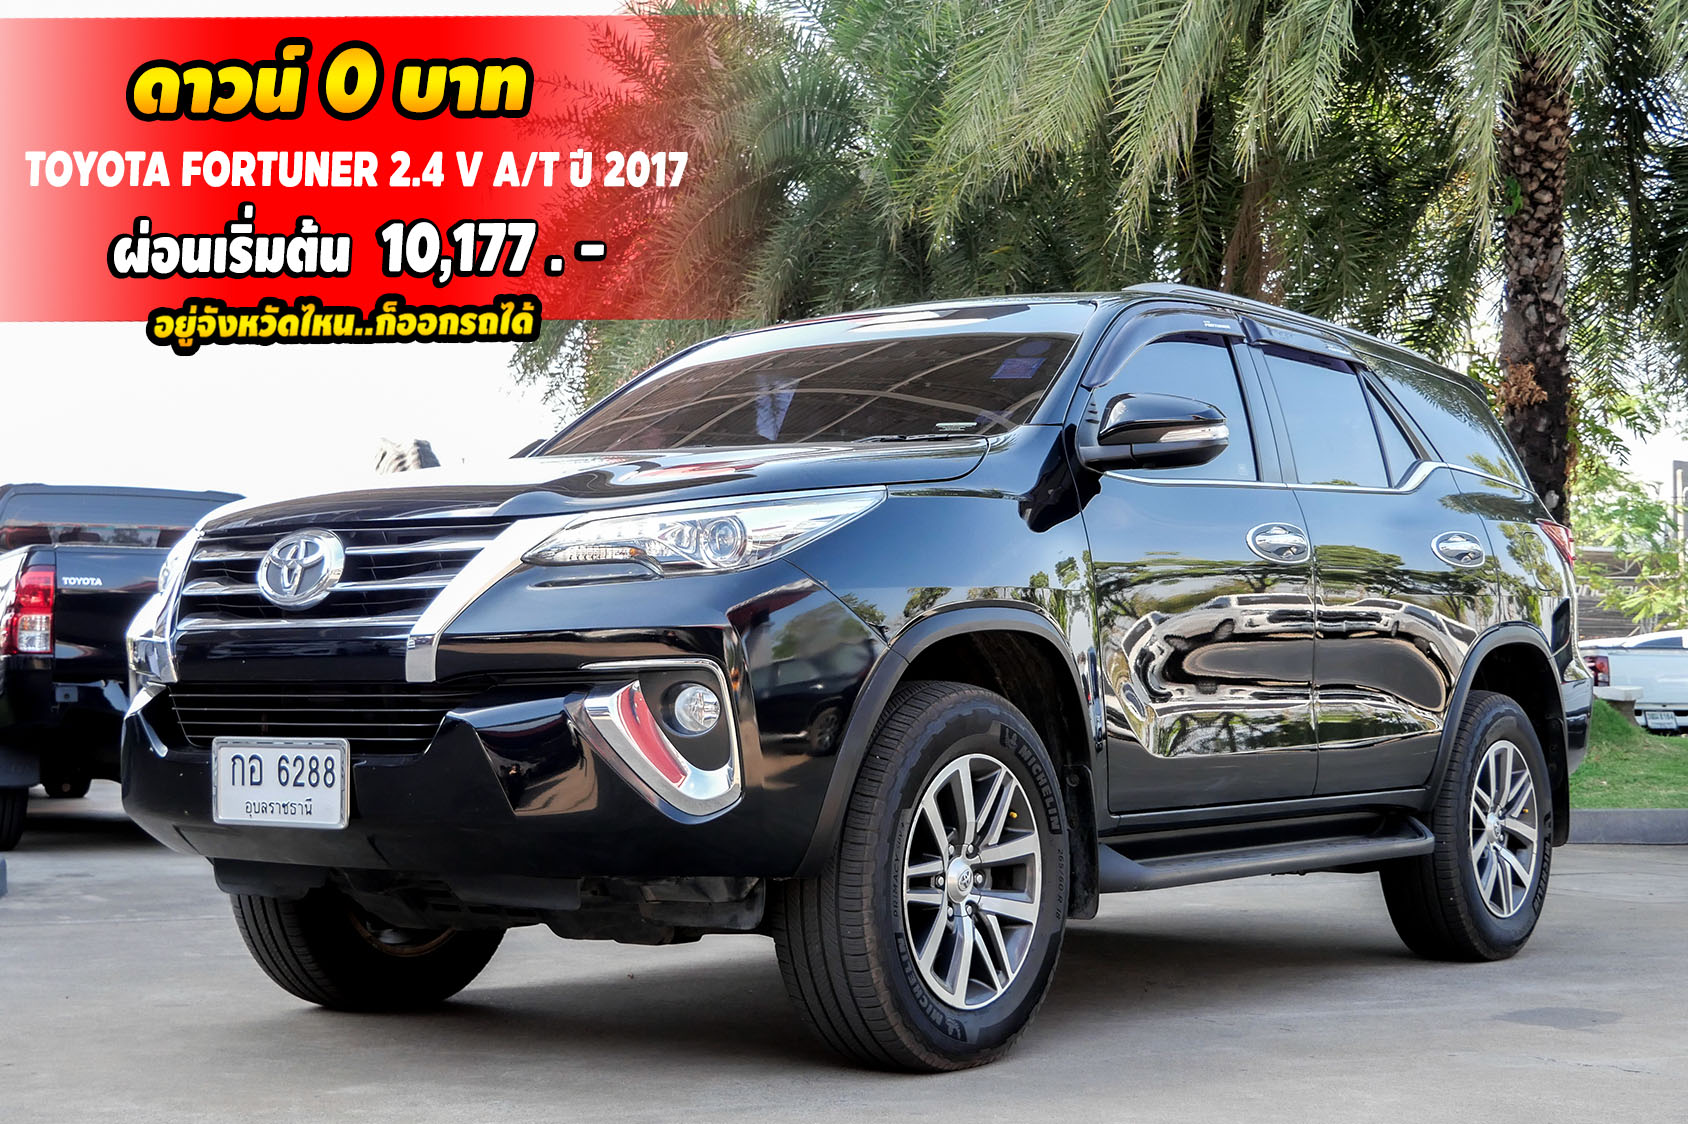 TOYOTA FORTUNER 2.4 V A/T  ปี 2017